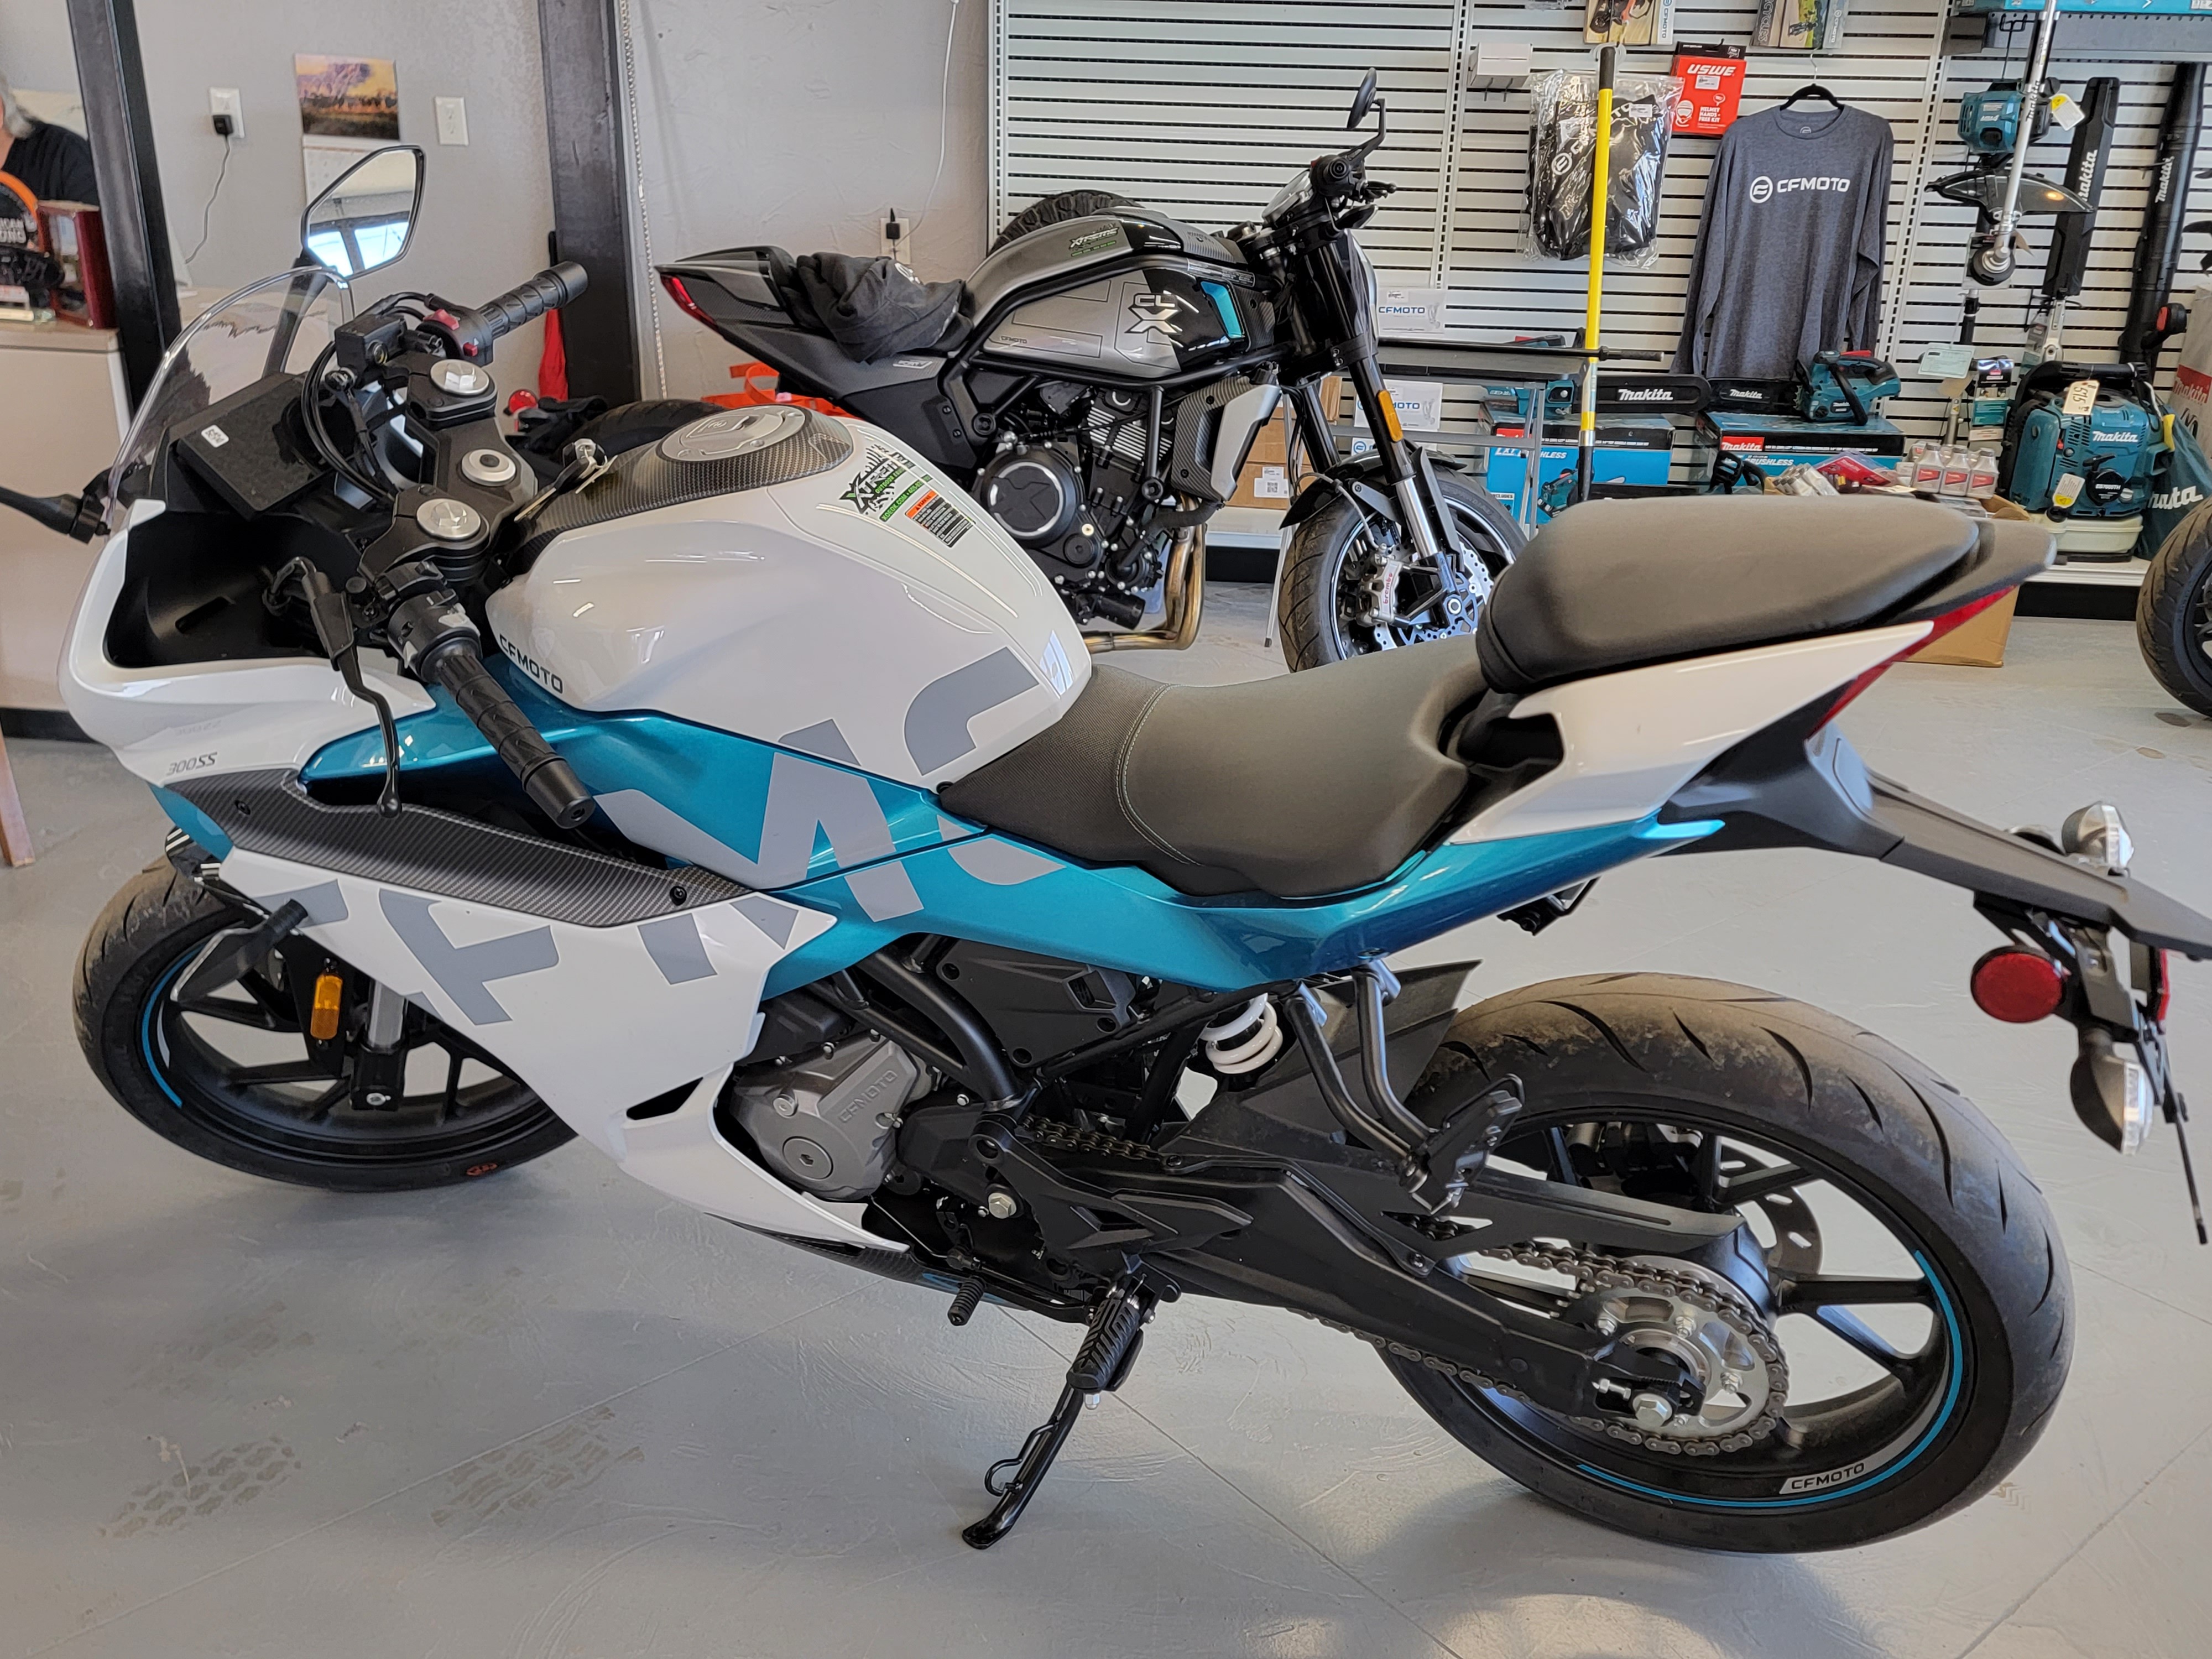 2022 CFMOTO 300 SS at Xtreme Outdoor Equipment